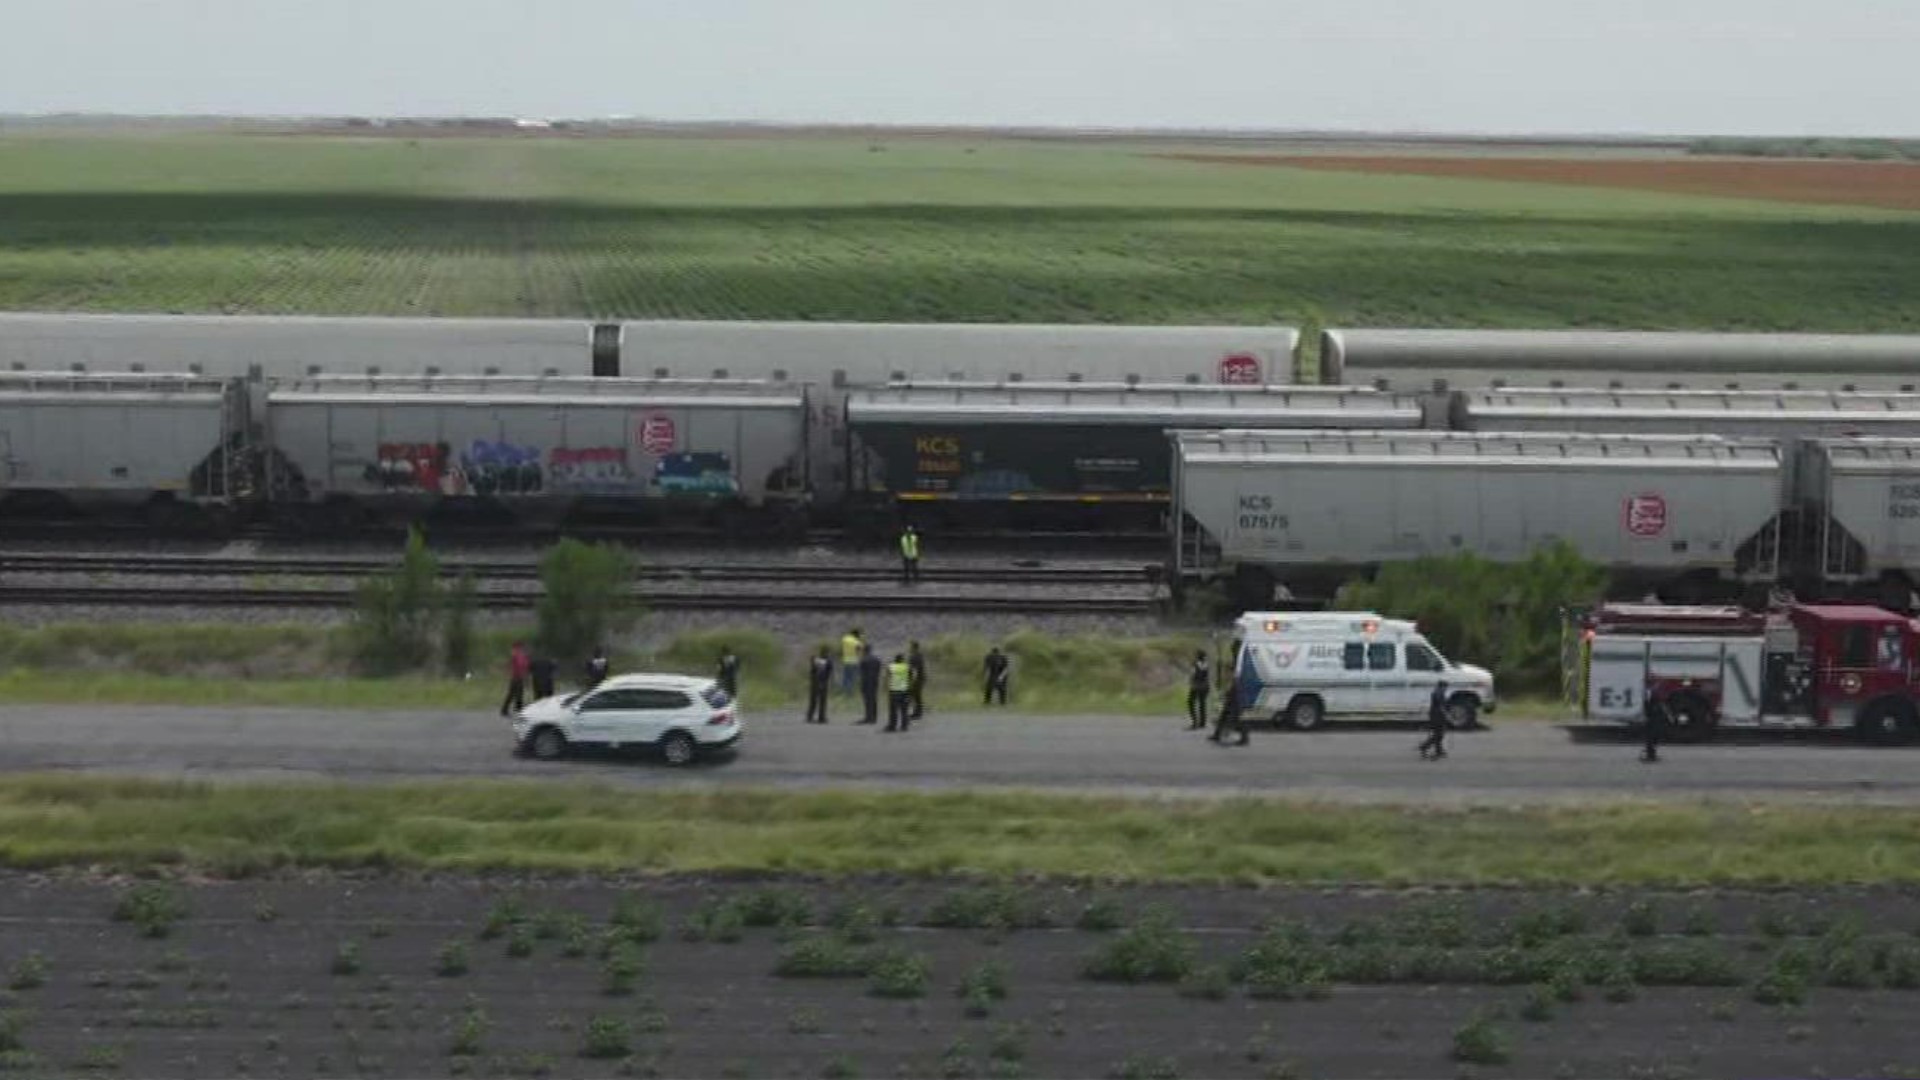 Officials said someone in the train car called 911 about their situation, prompting a response from law enforcement.